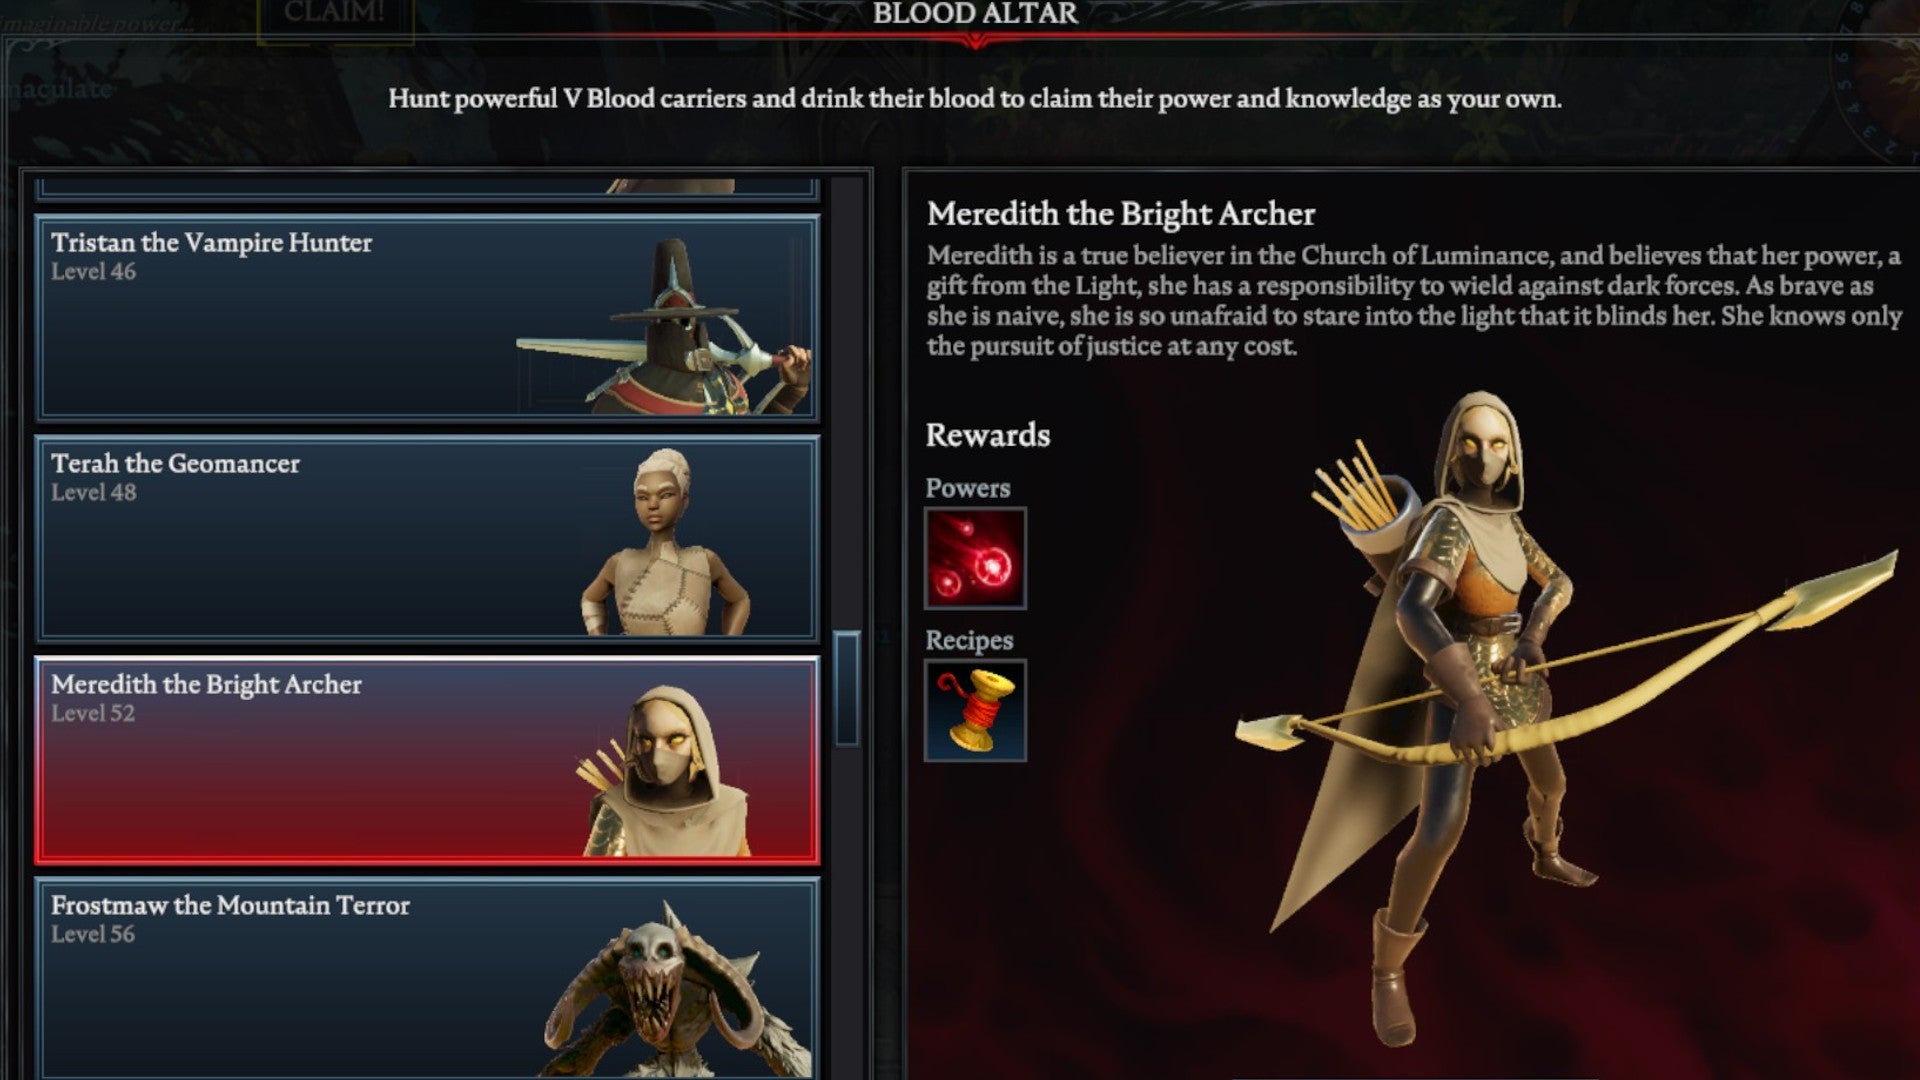 V Rising Meredith the Bright Archer Blood Altar tracking page, showing an image of the masked archer on the right and a list of bosses on the left